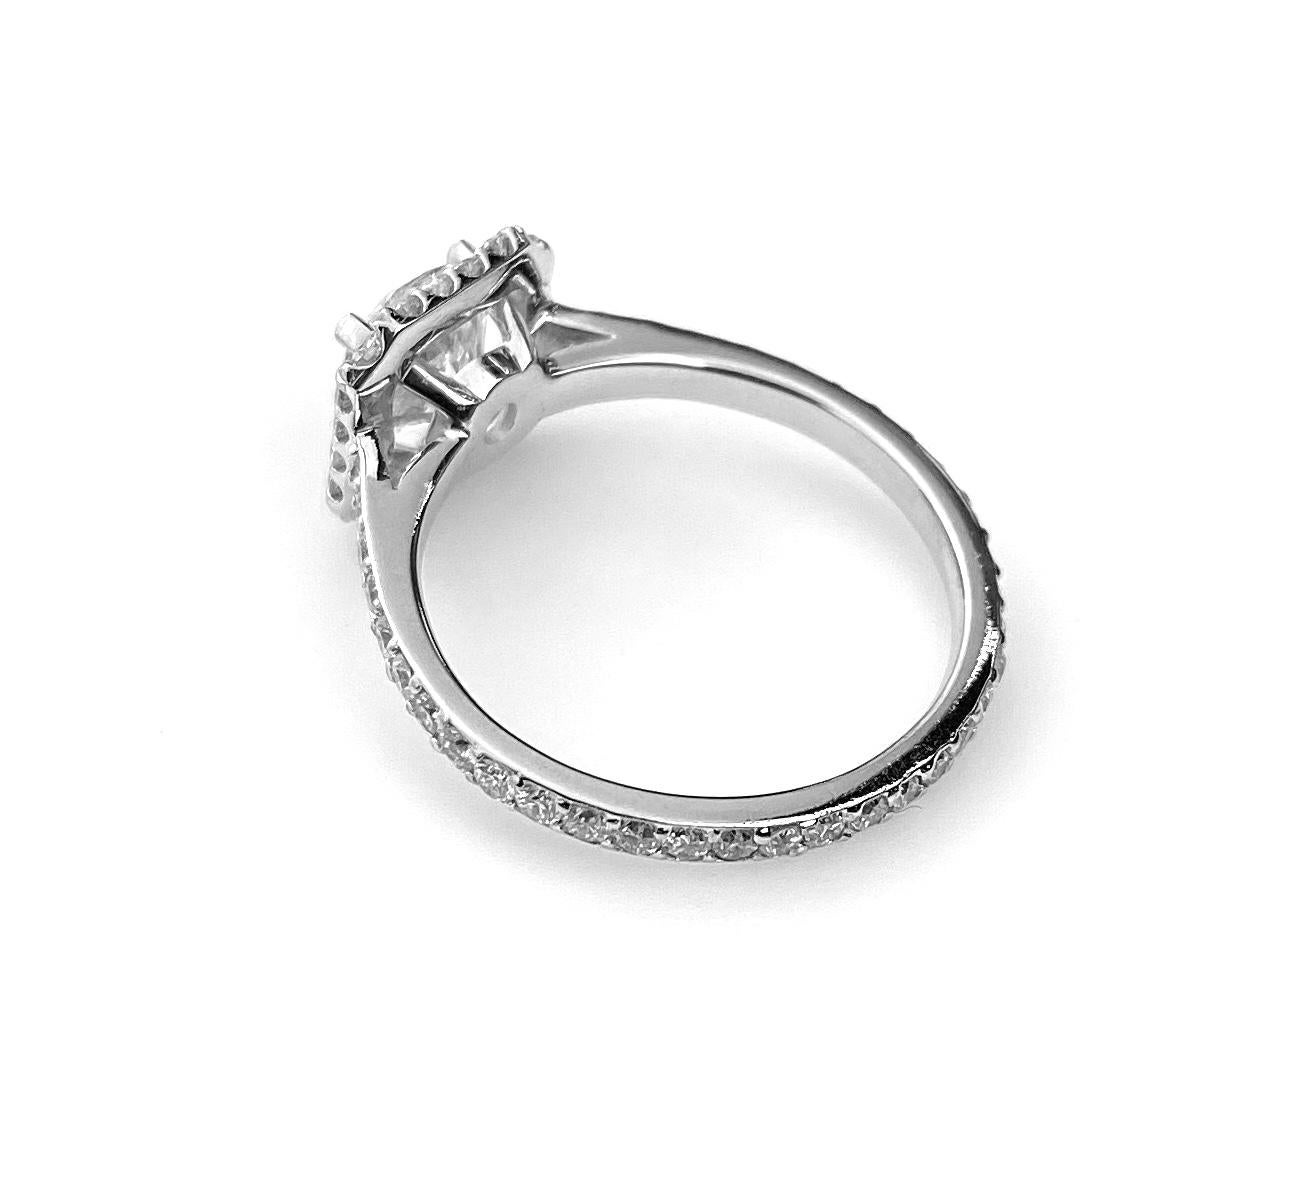 Square halo engagement ring in 18k white gold with 0.99ct round brilliant cut center diamond, G colour and VS2 clarity. Surrounded by a micro-set halo and band of 56 diamonds totaling 0.64ct. Current ring size 5 1/4. Complementary ring resizing up